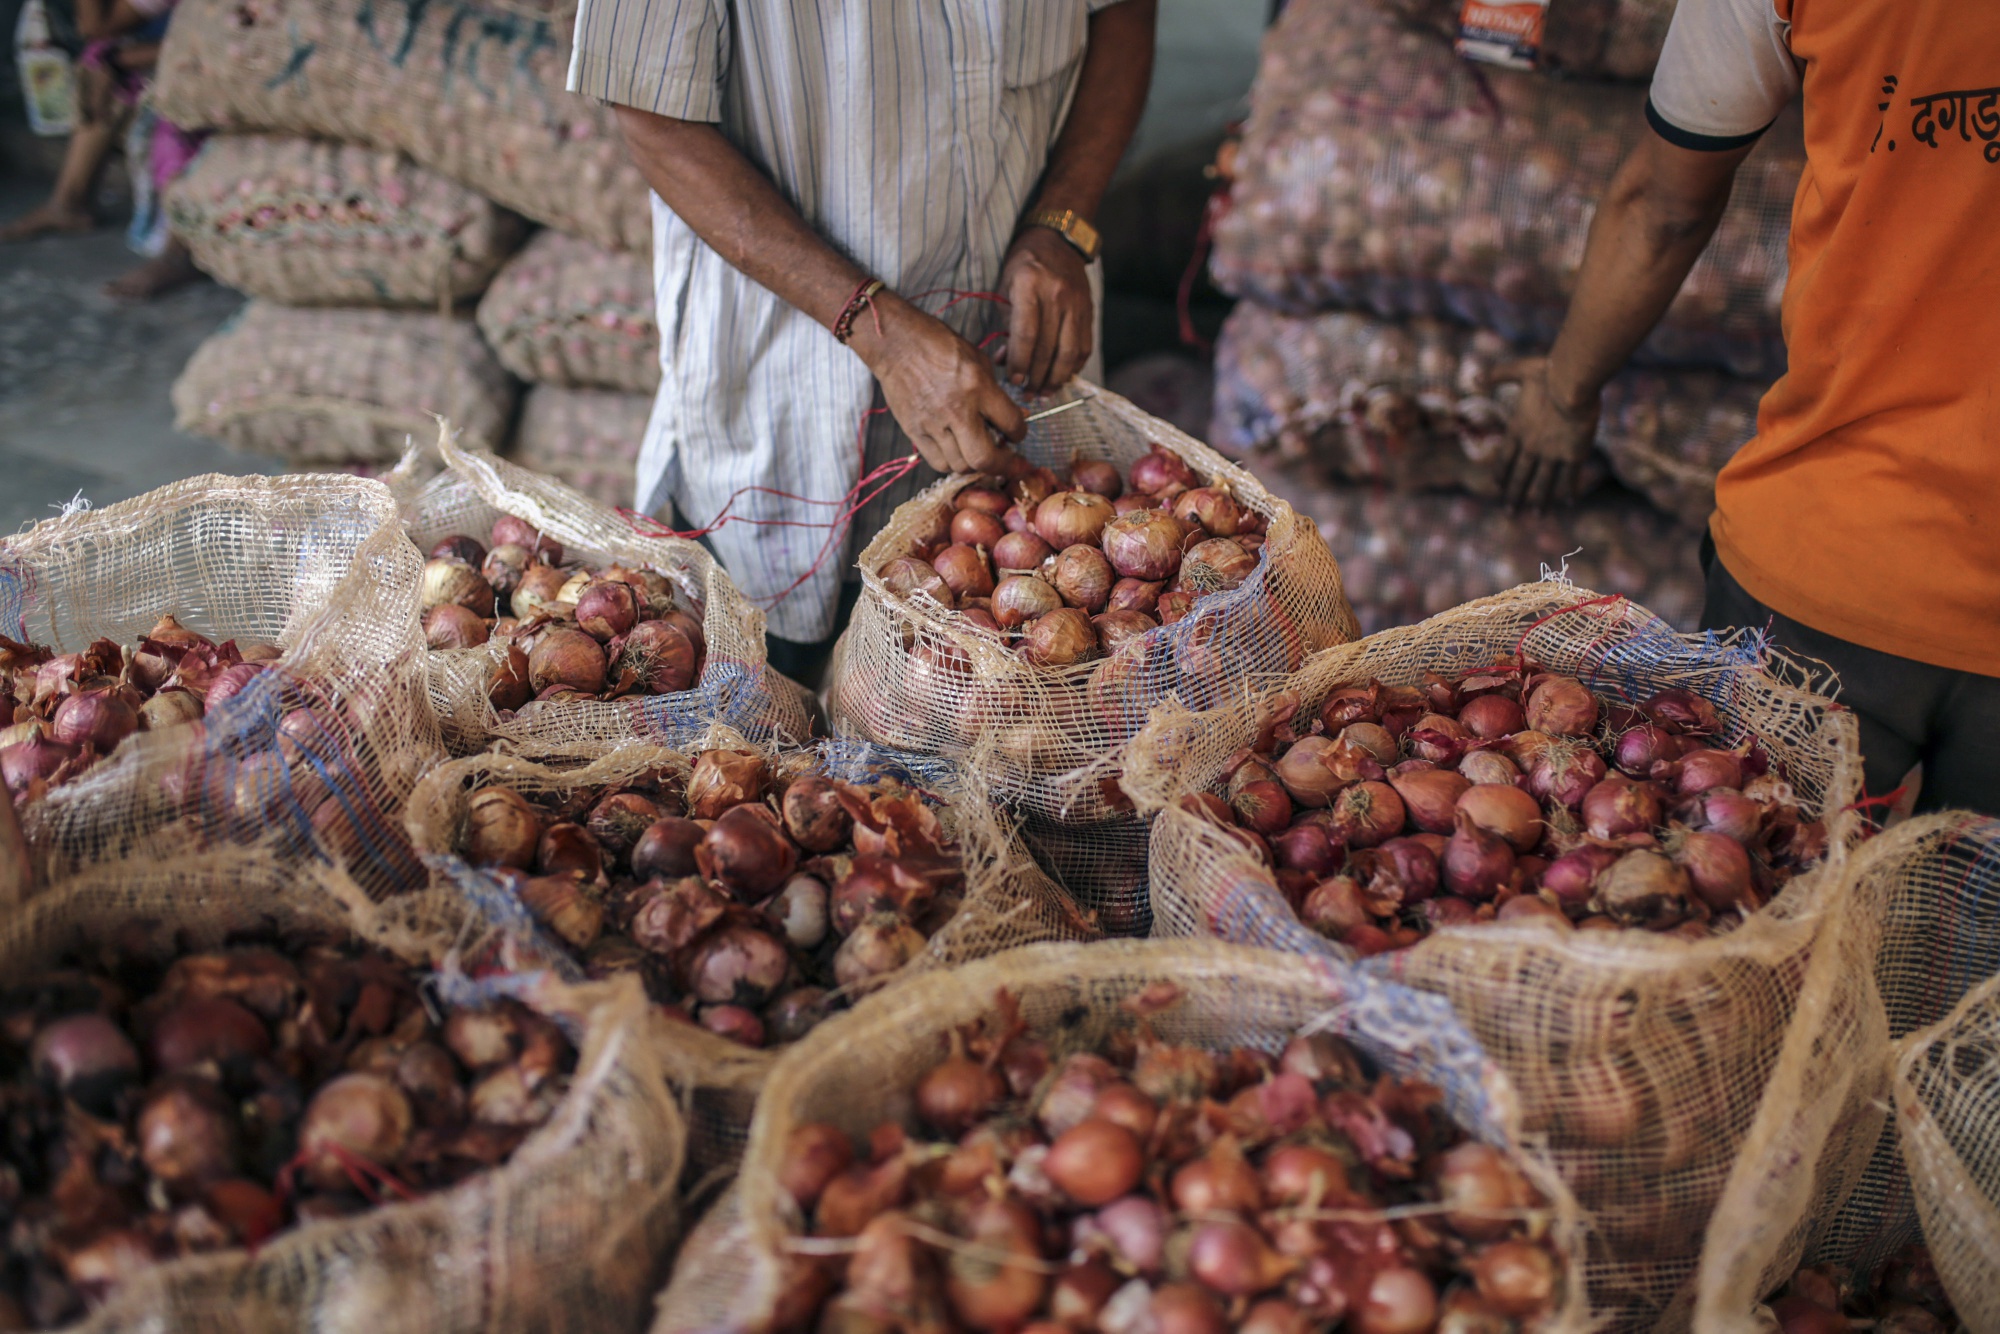 India imposes 40% tax on onion exports to cool inflation - Bloomberg